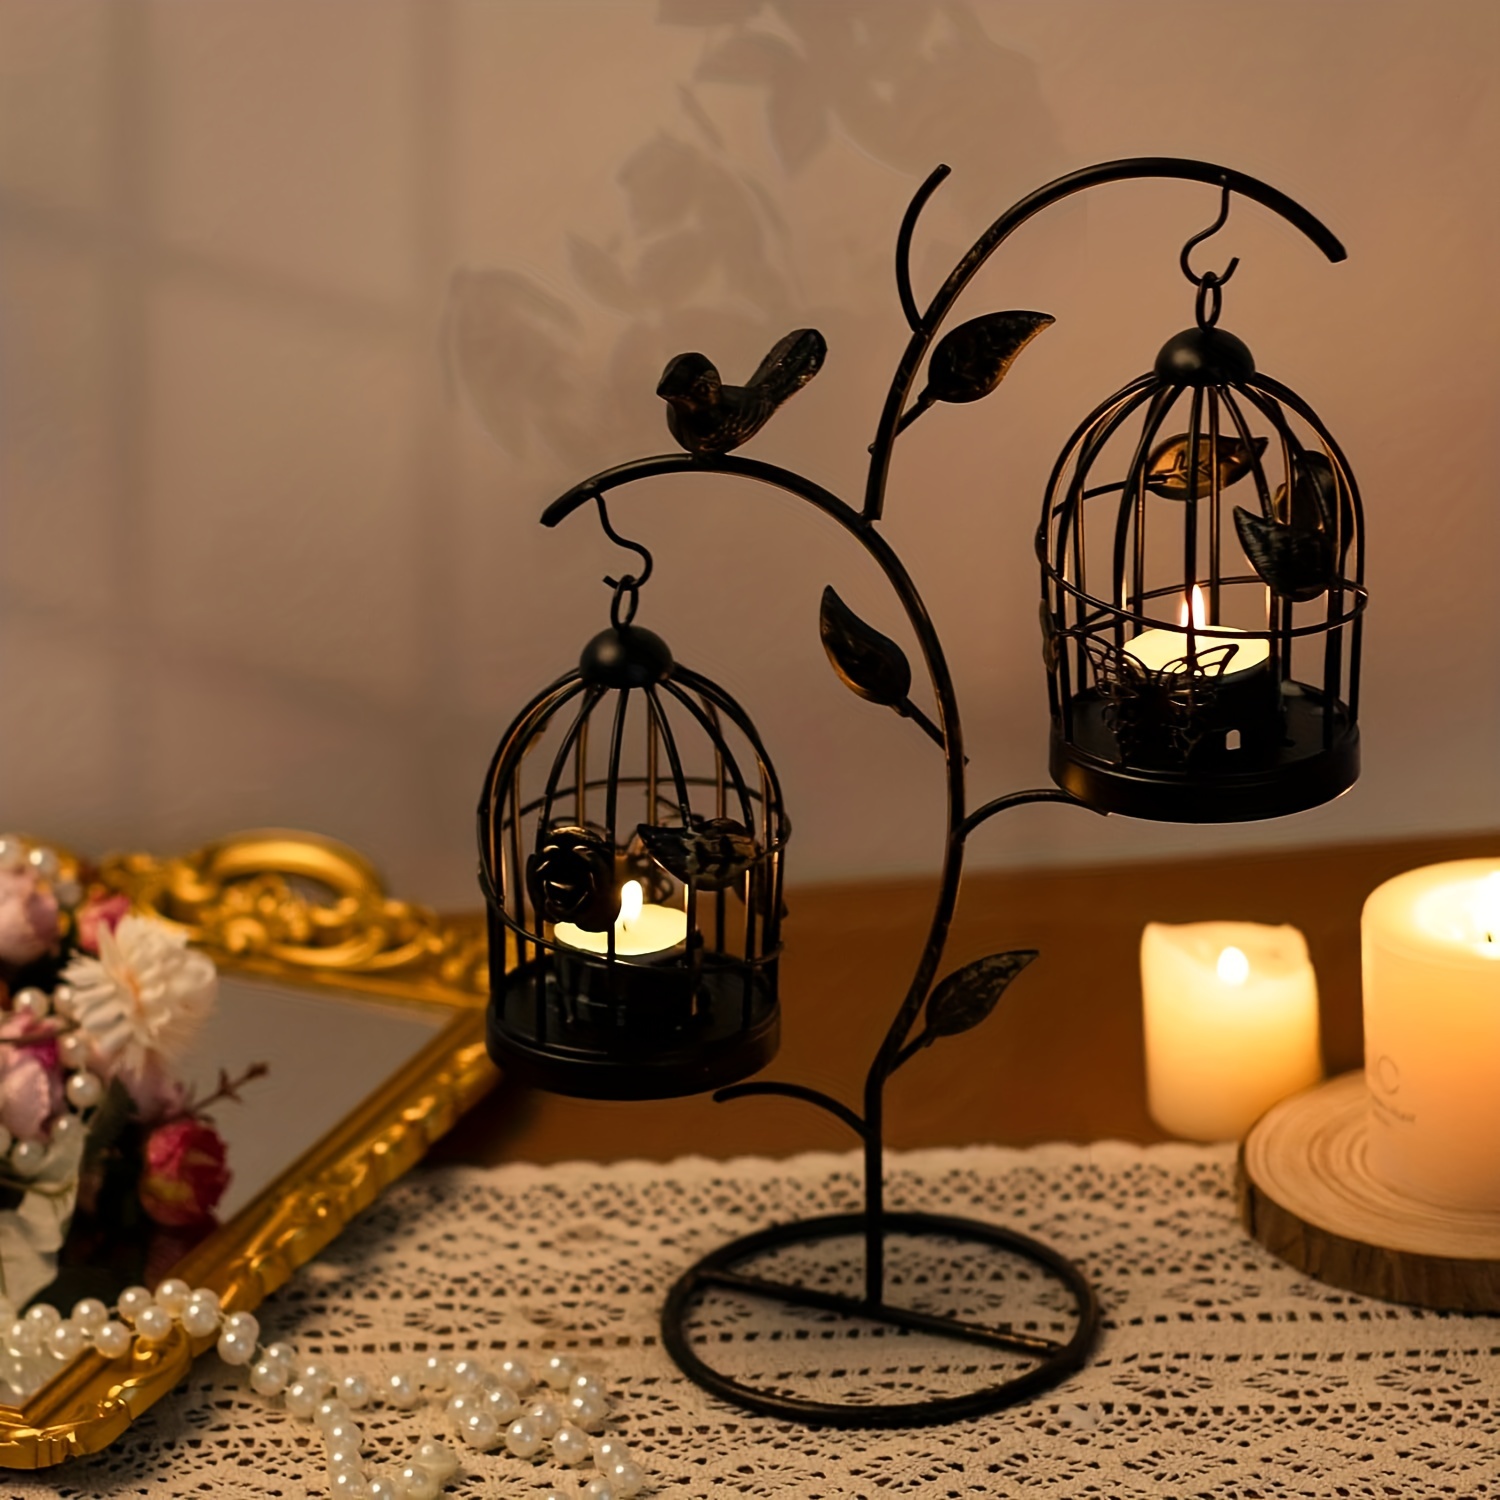  Metal Copper Bird Cage Candle Holder, Hollow Metal Bird Cage  Candle Tea Light Holder Candle Holder Hanging Lantern Home Decoration Brass  Geometric Tree Wall Decoration Stove Head Candle Holder : Home